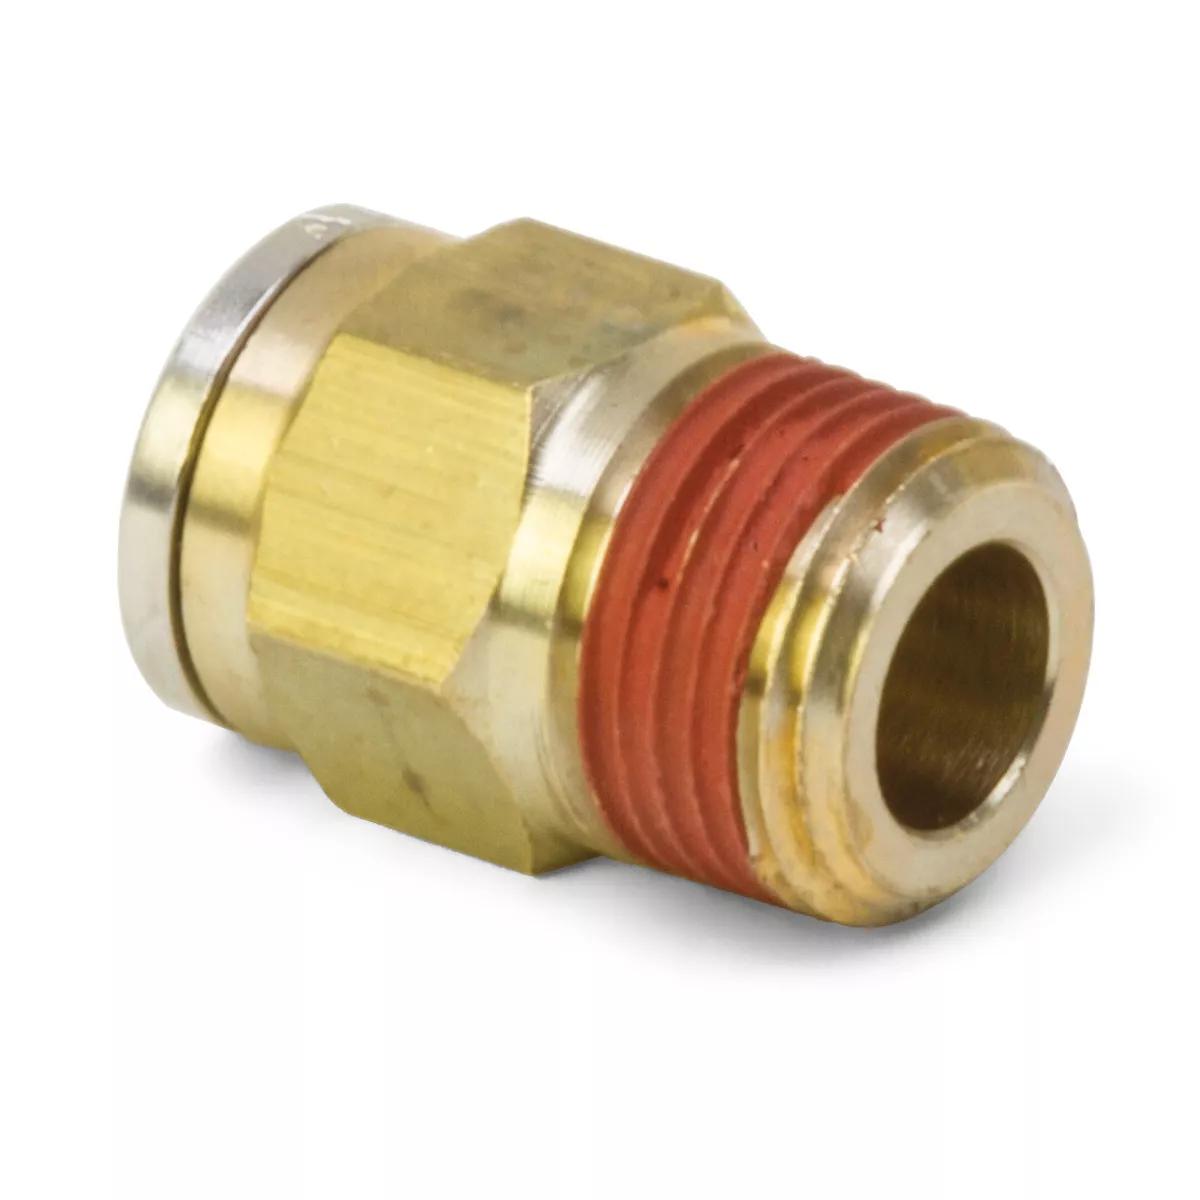 M12 x 3/8" DOT Male Connector